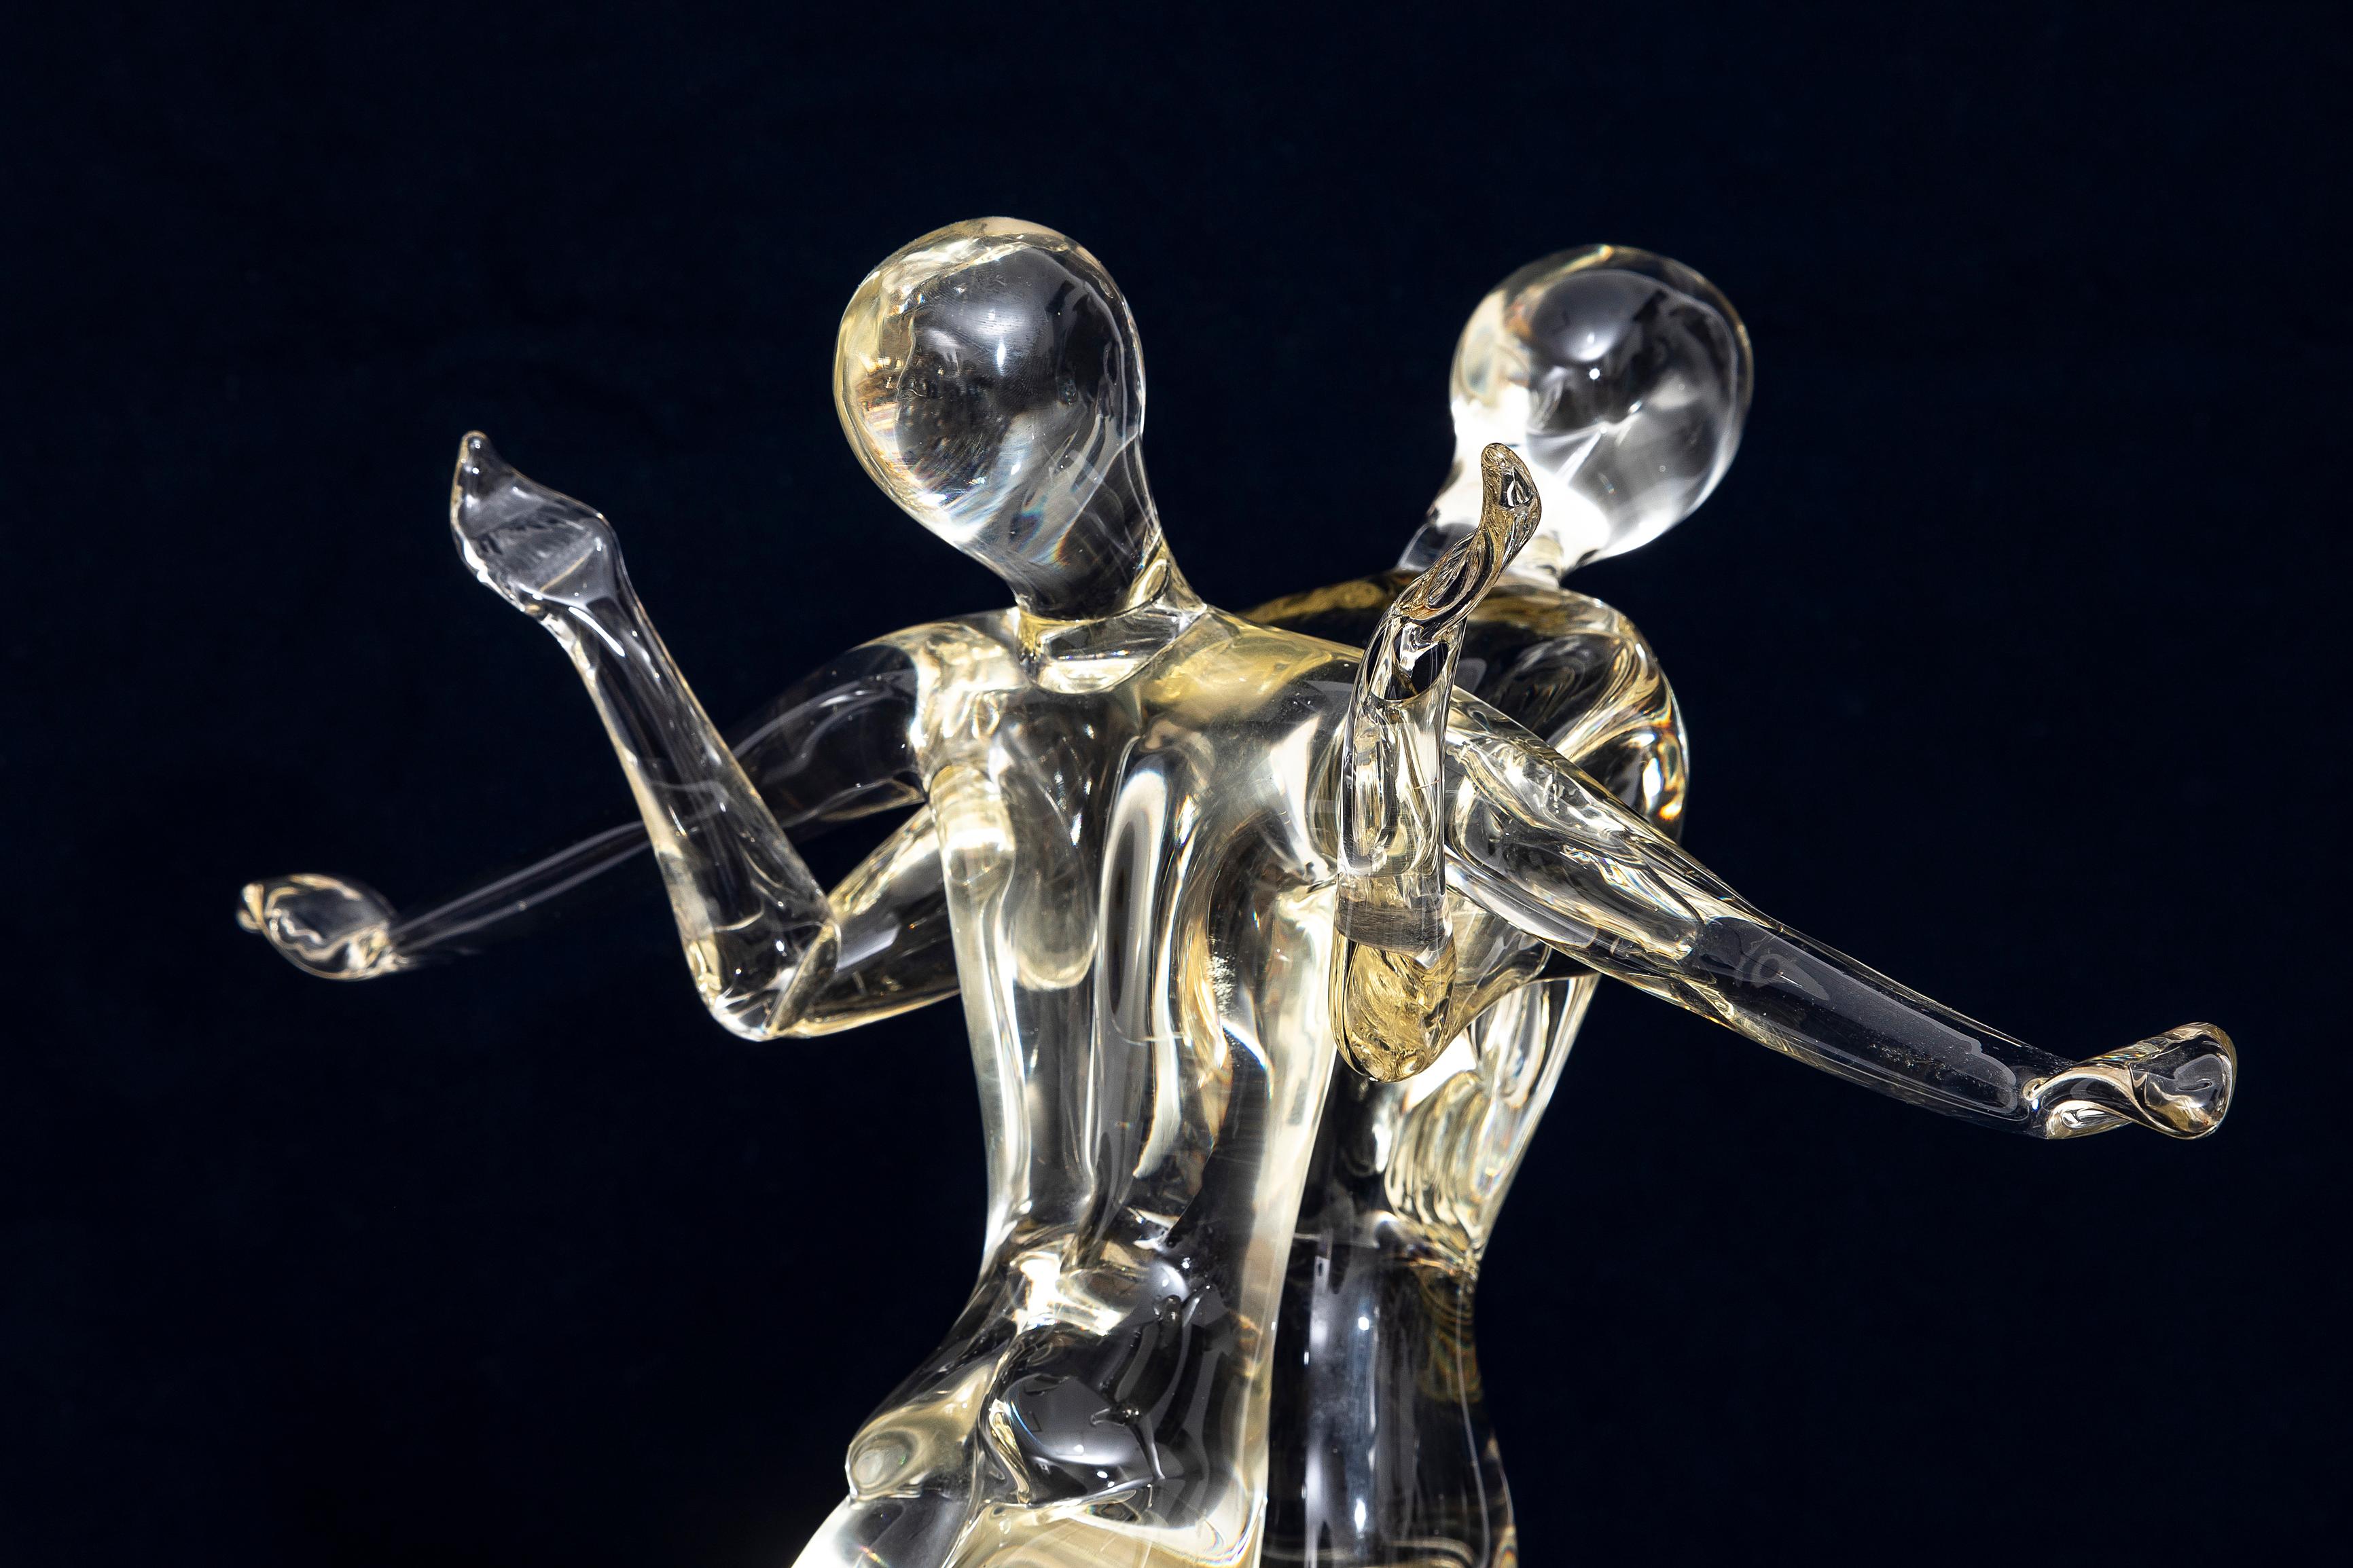 A Two-piece Renato Anatra Gymnast Dancer Sculpture by Murano Art Glass, Signed For Sale 1